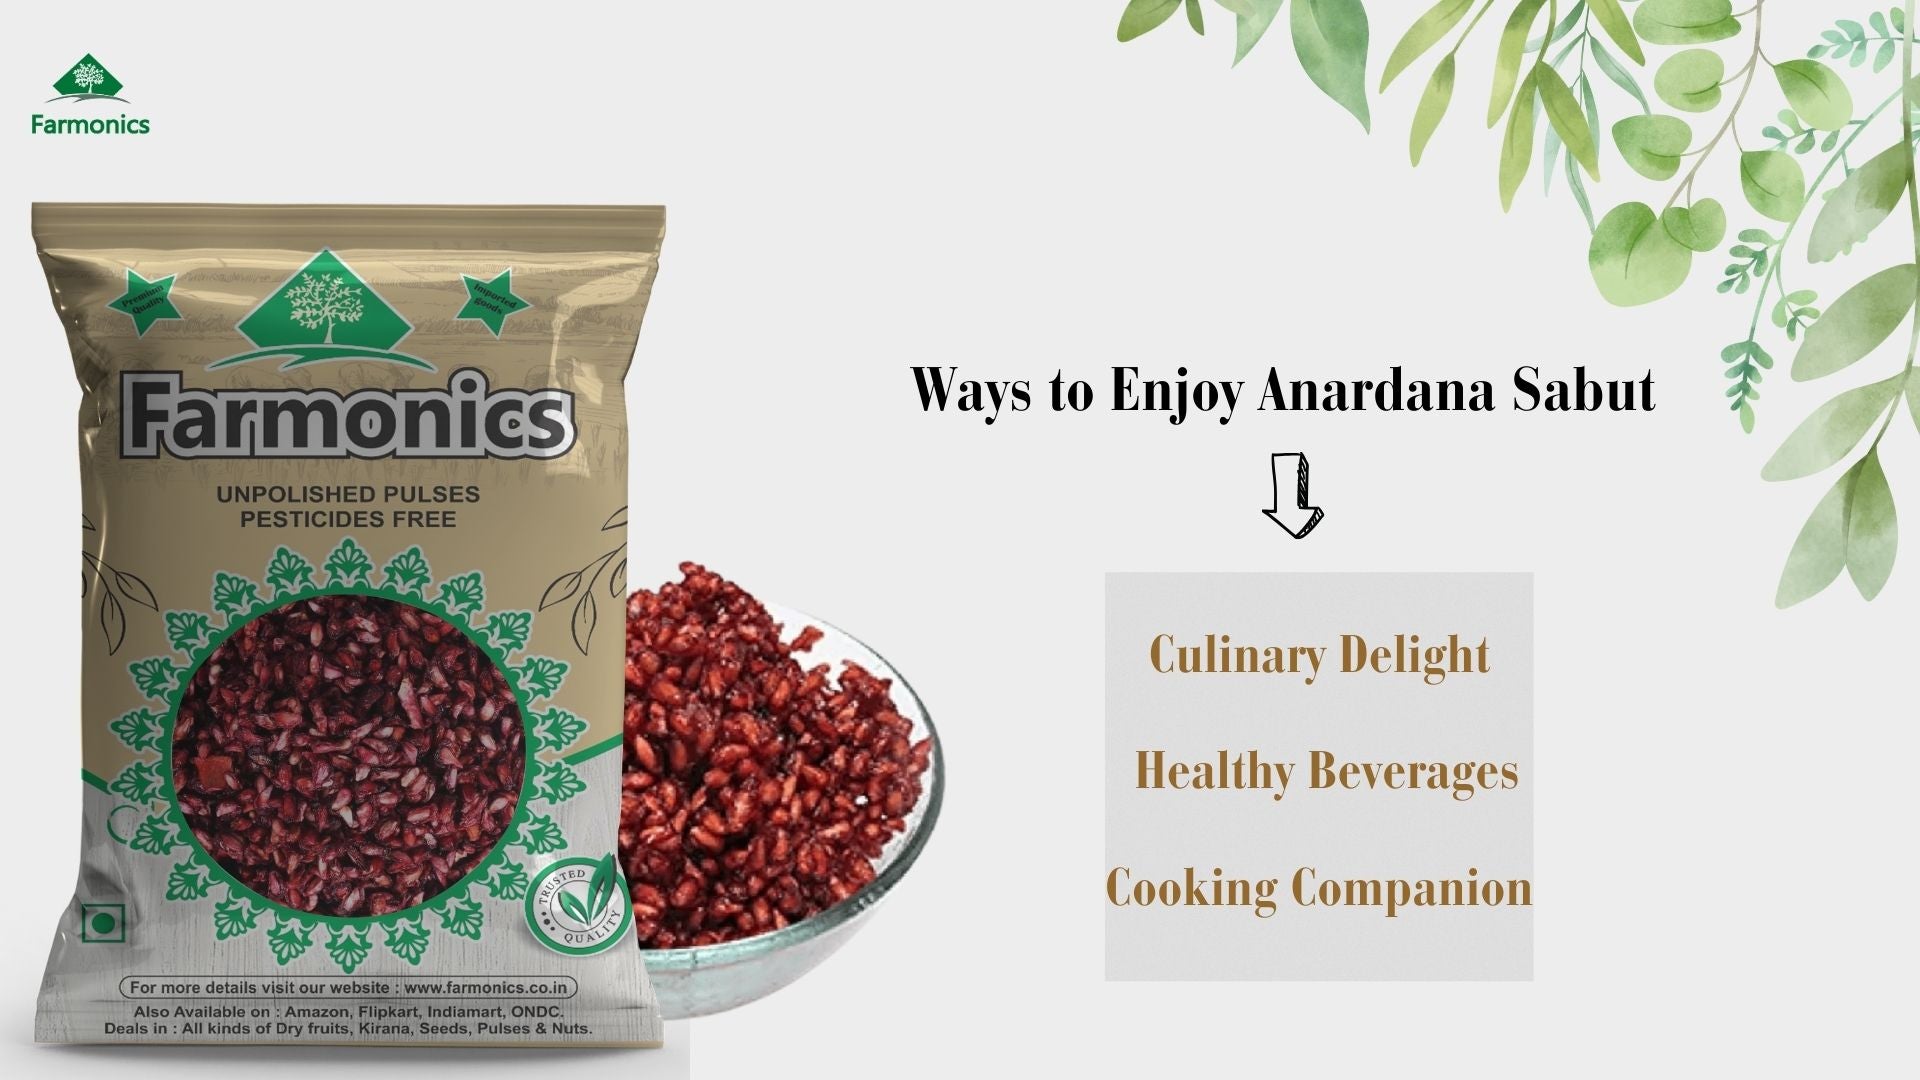 Here are the list of ways in which you can enjoy premium quality farmonics anardana sabut